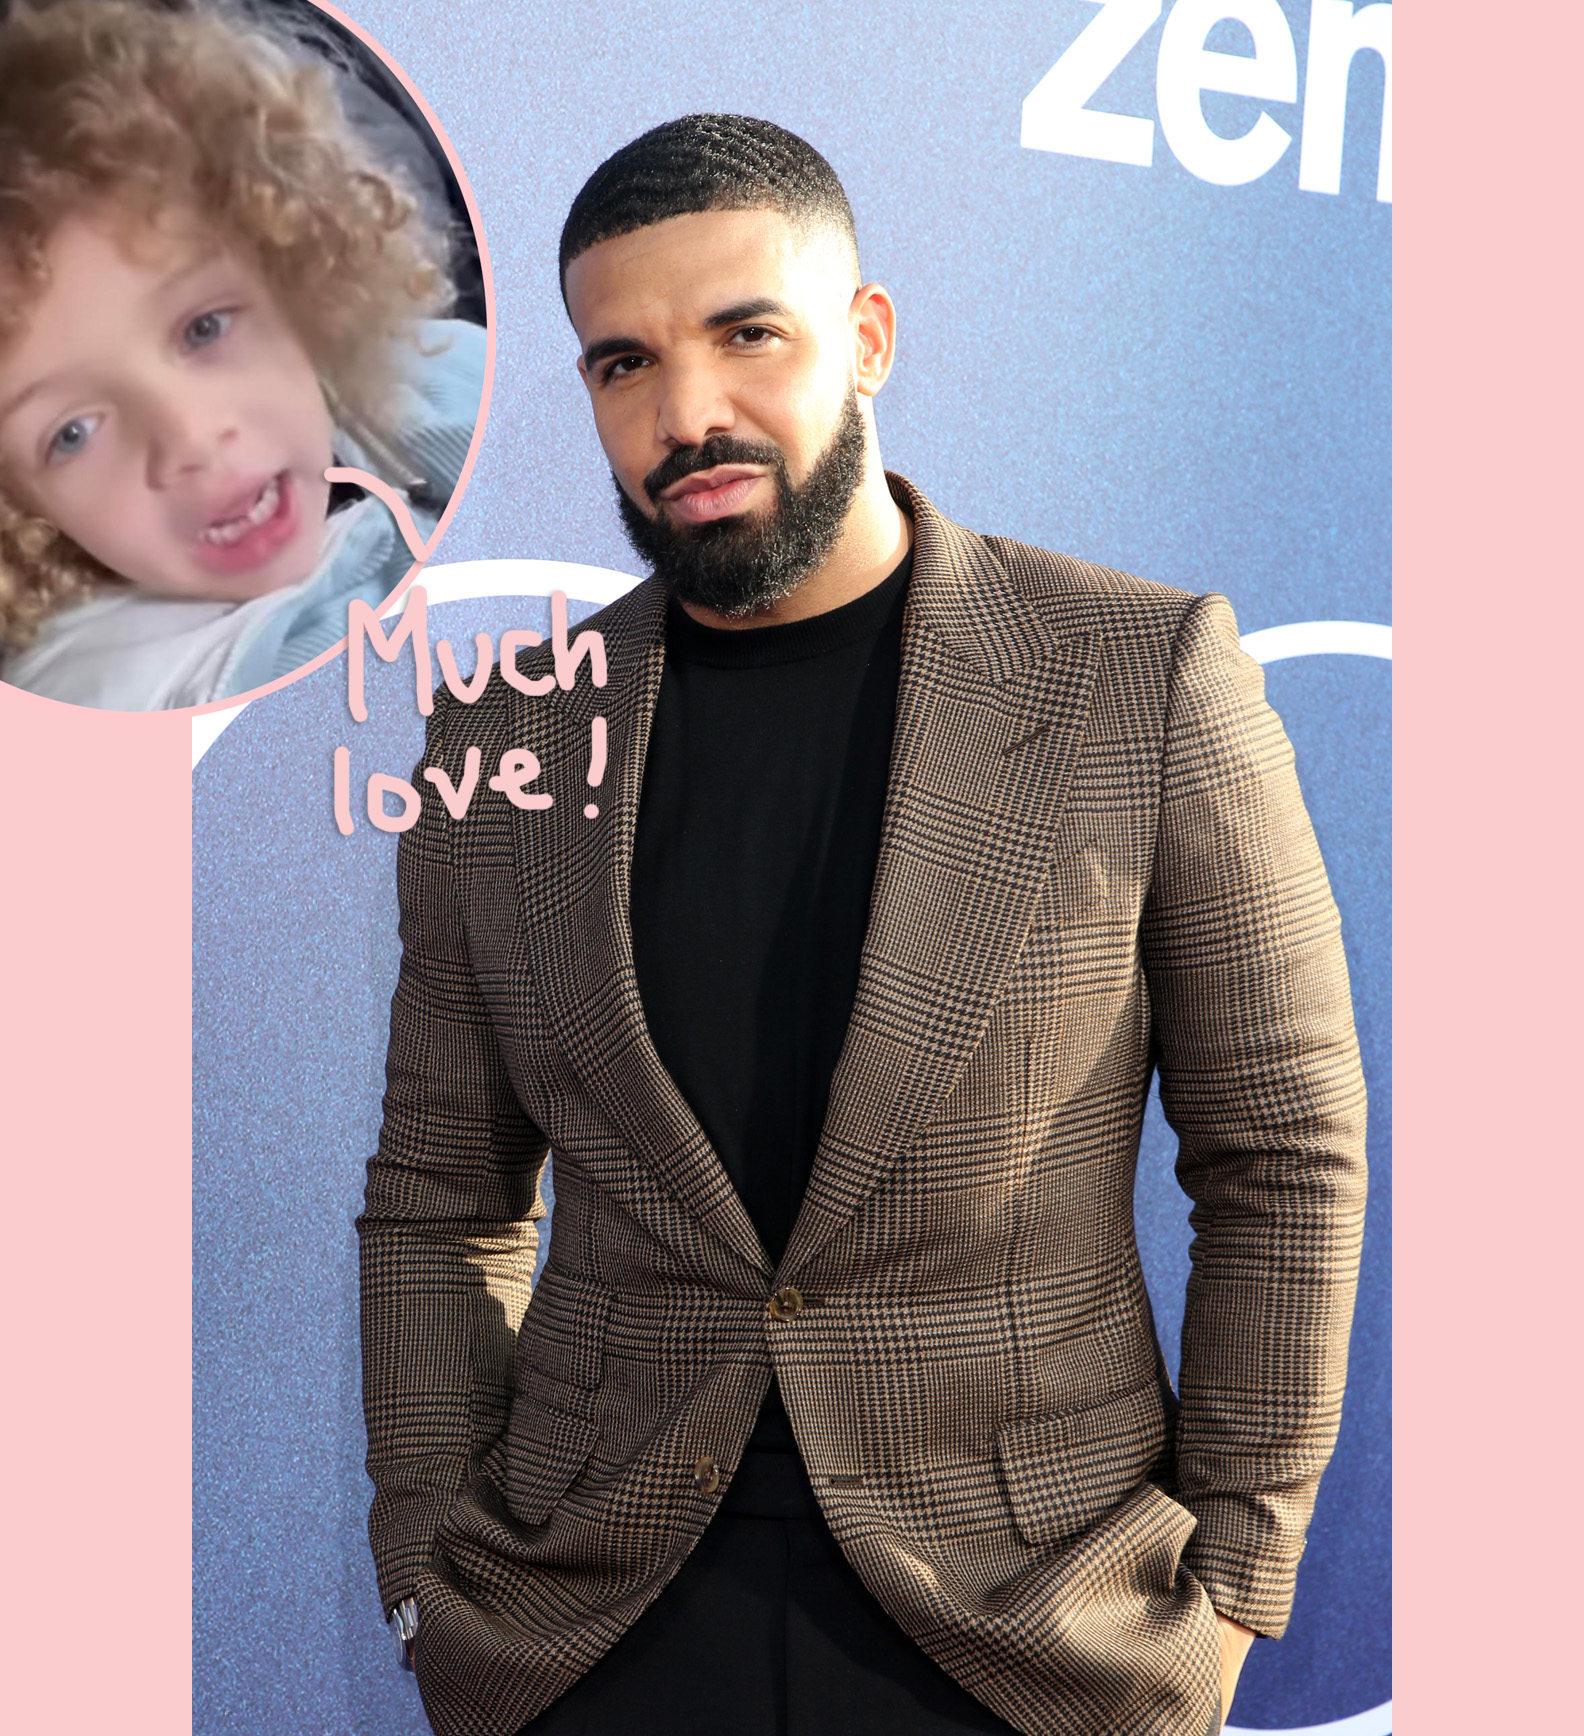 #Drake’s Son Adonis Mimics The Rapper For Special Happy Birthday Surprise!